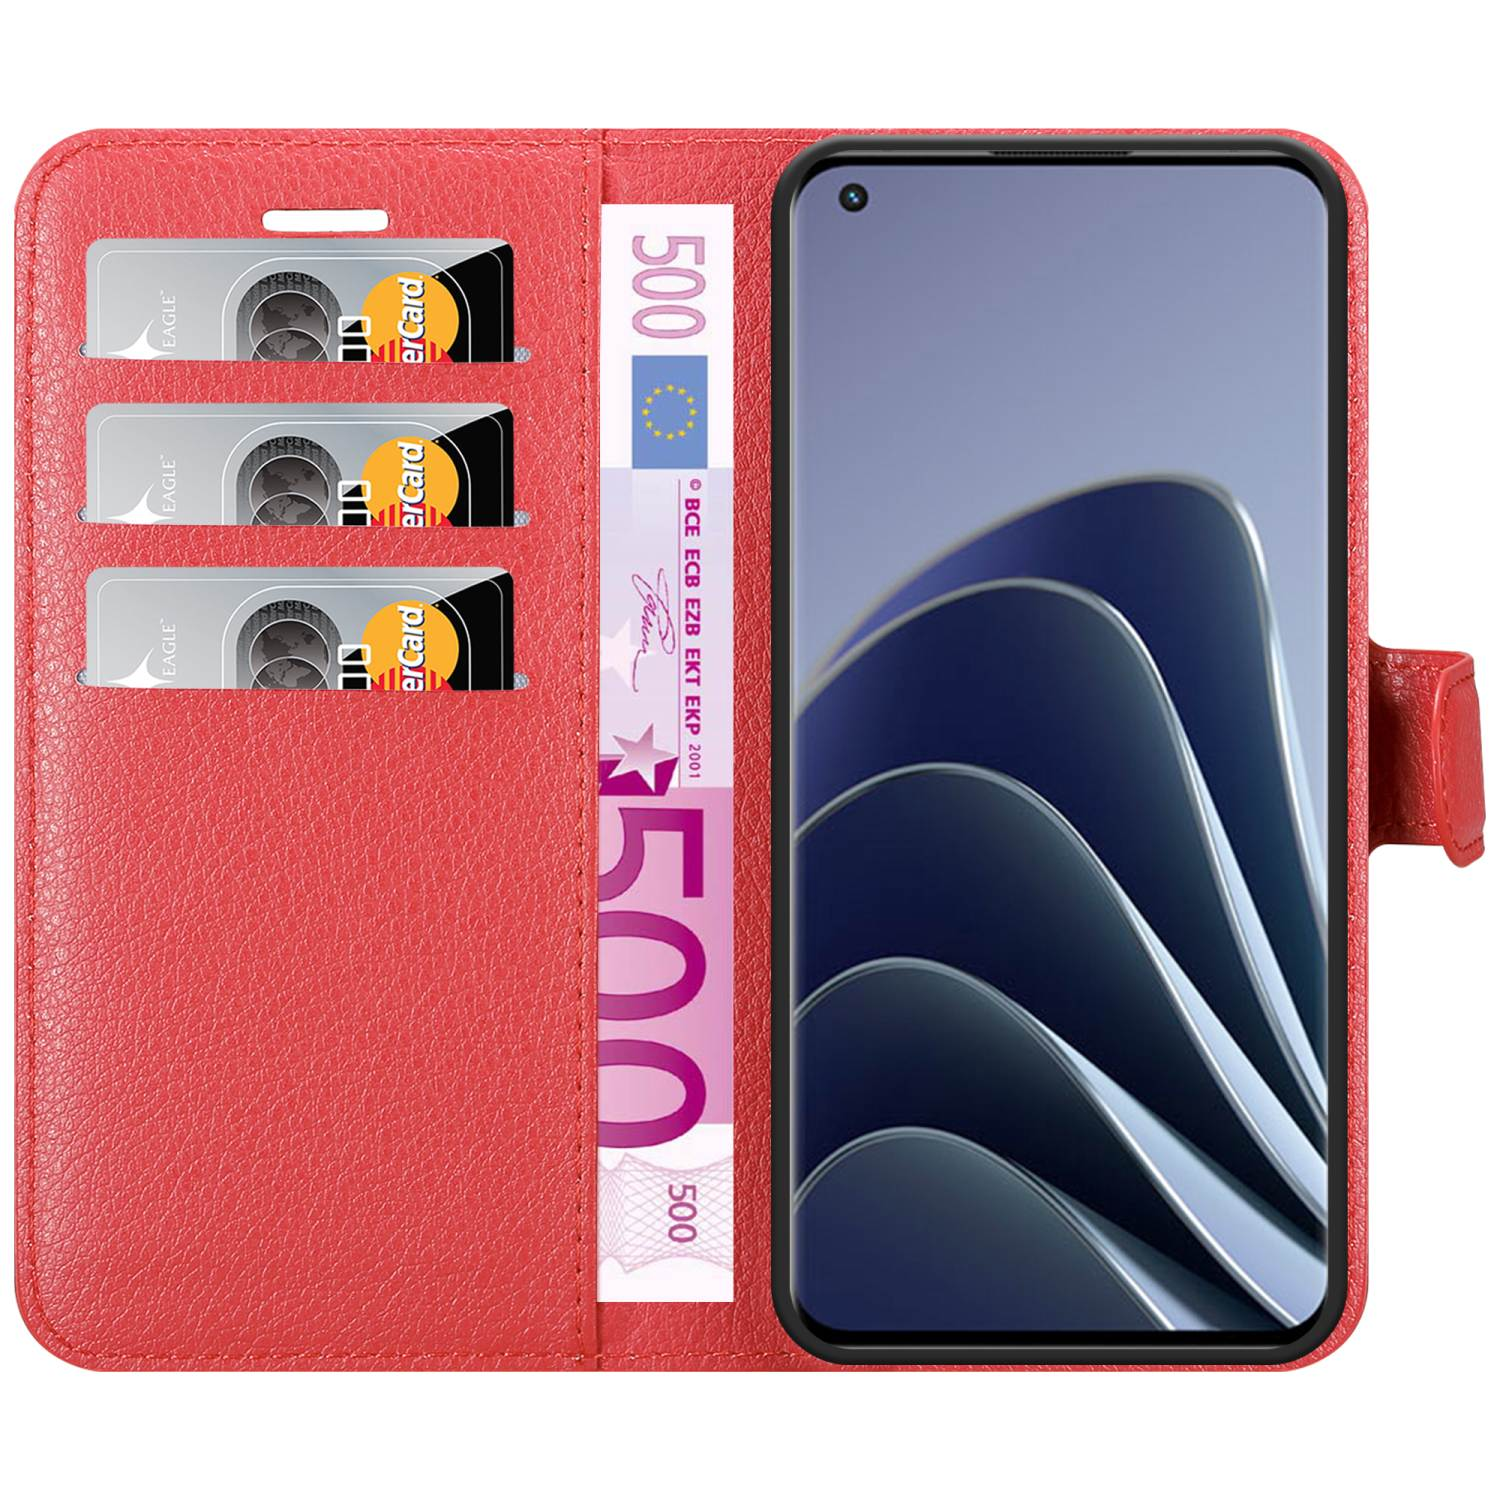 CADORABO Bookcover, ROT PRO KARMIN 5G, Standfunktion, Hülle Book 10 OnePlus,